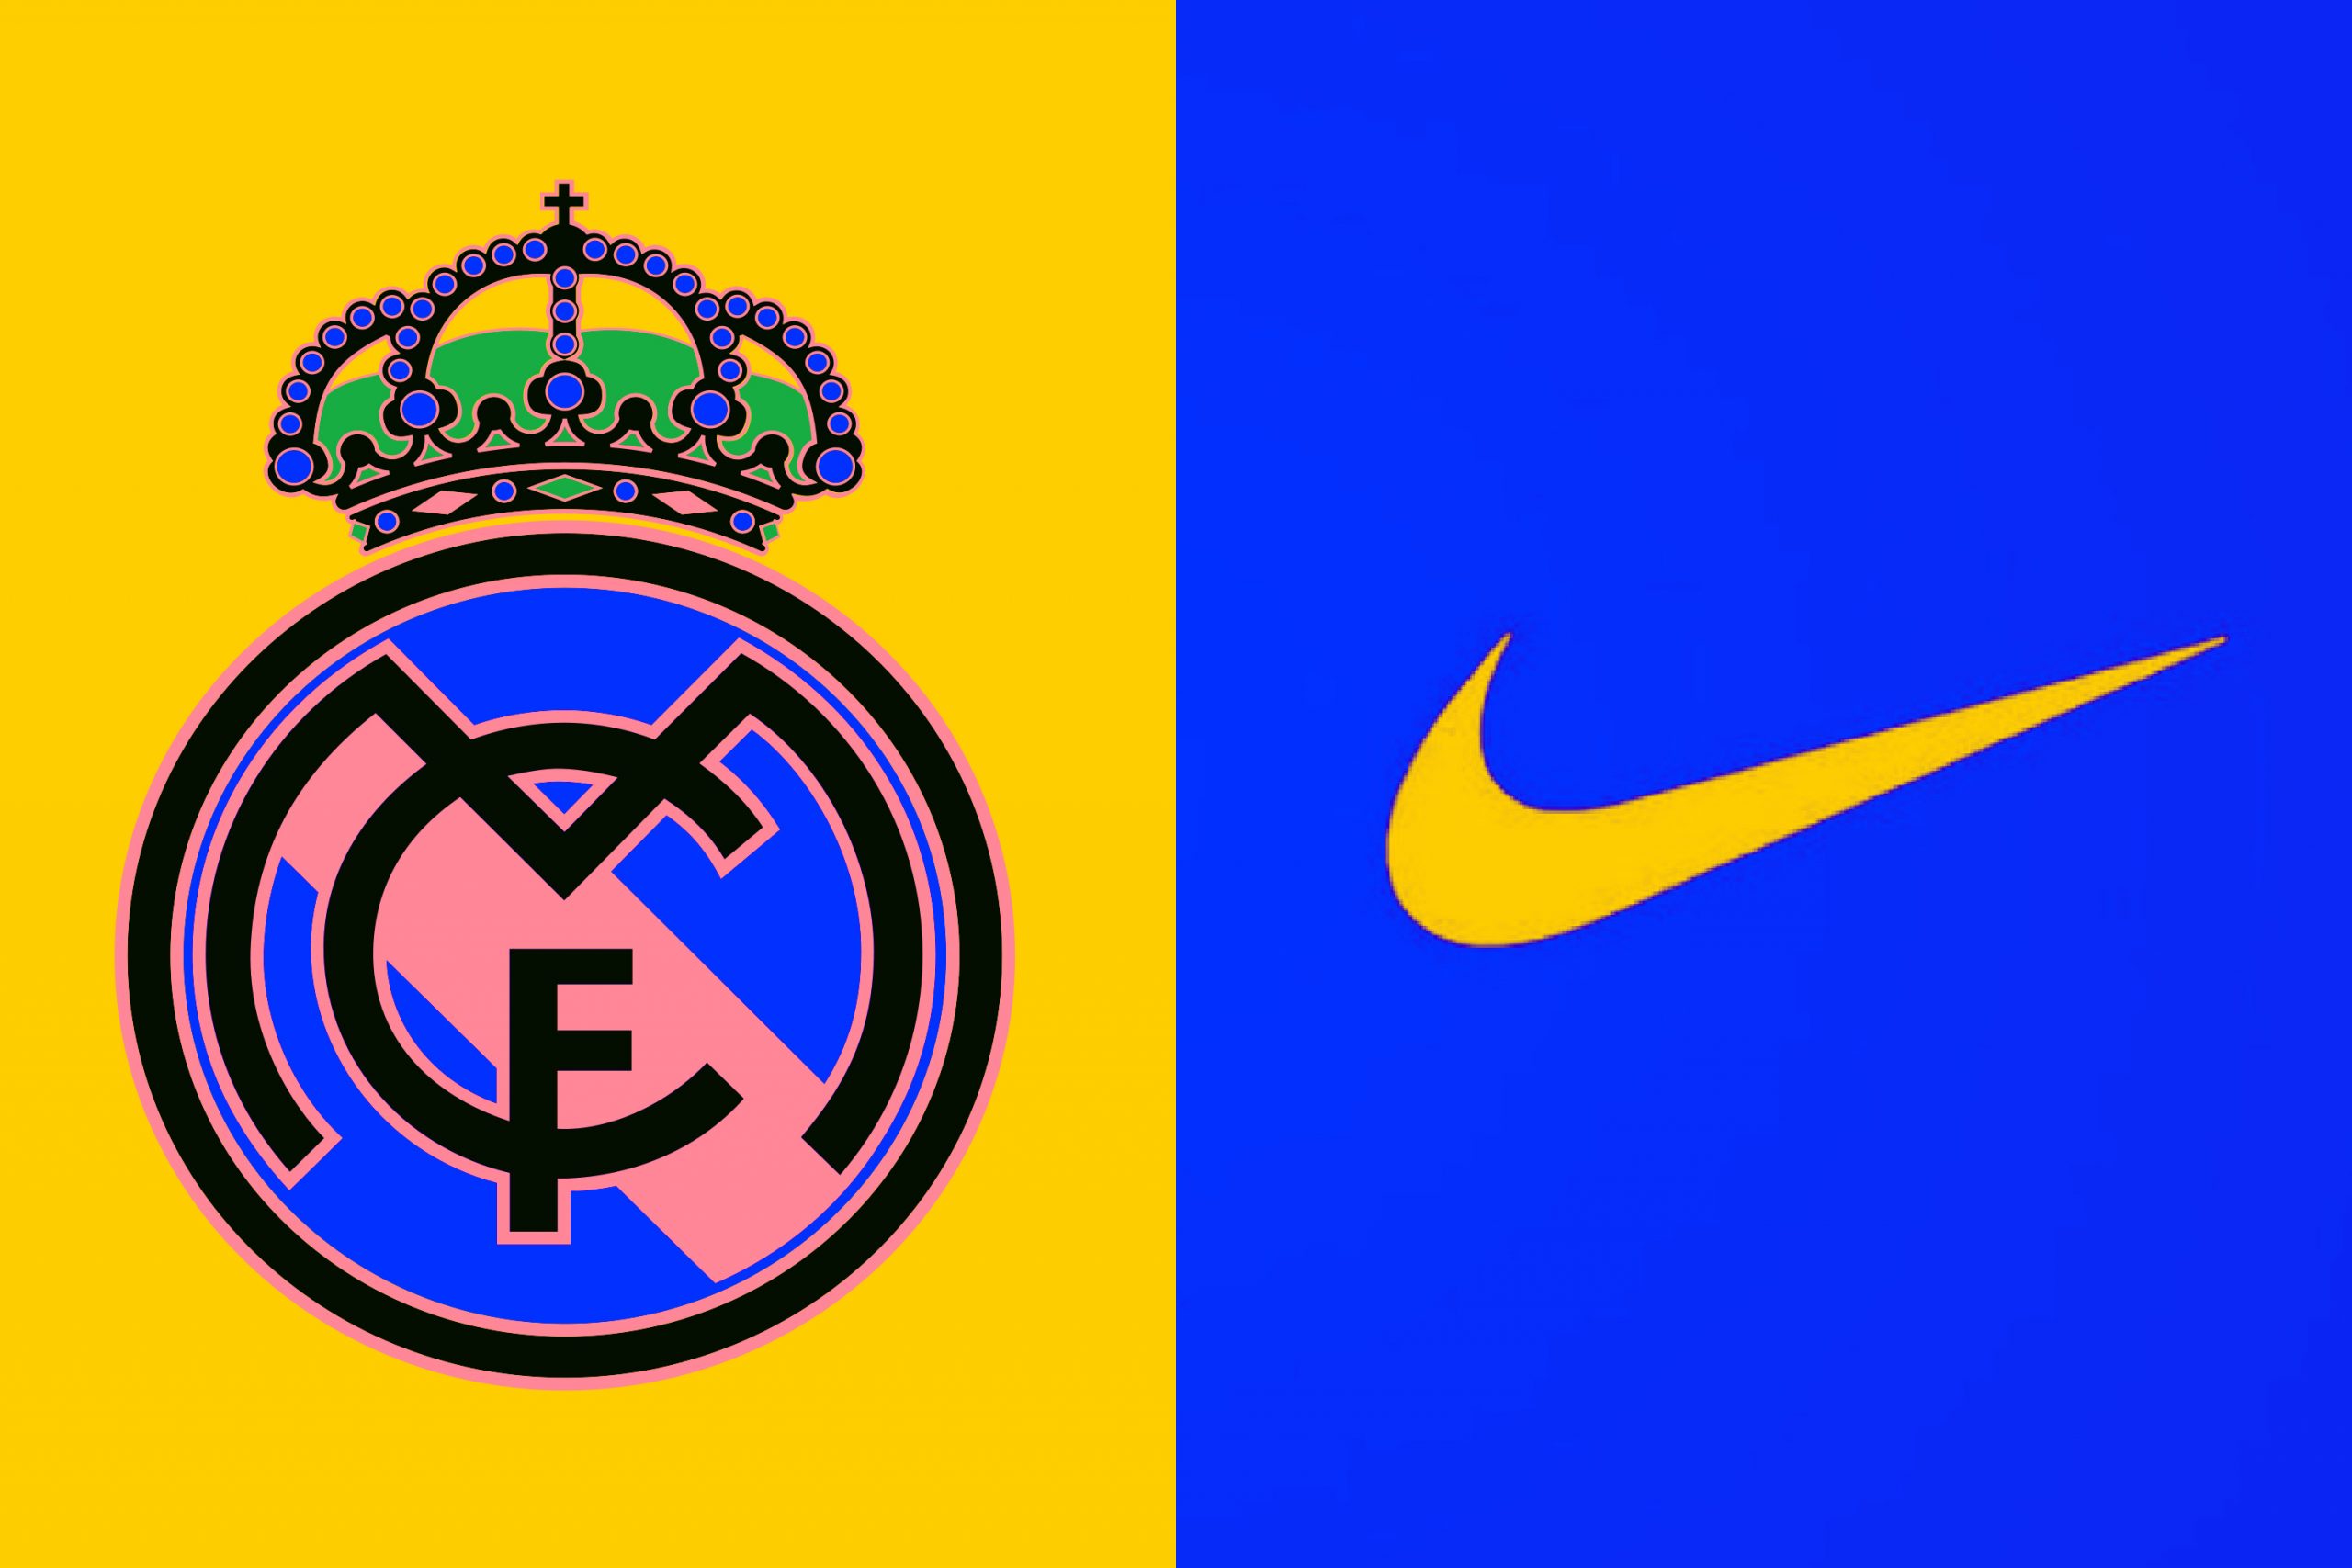 ‘What if Nike made a Real Madrid kit’ – Designer unveils drop dead gorgeous concept for Los Blancos